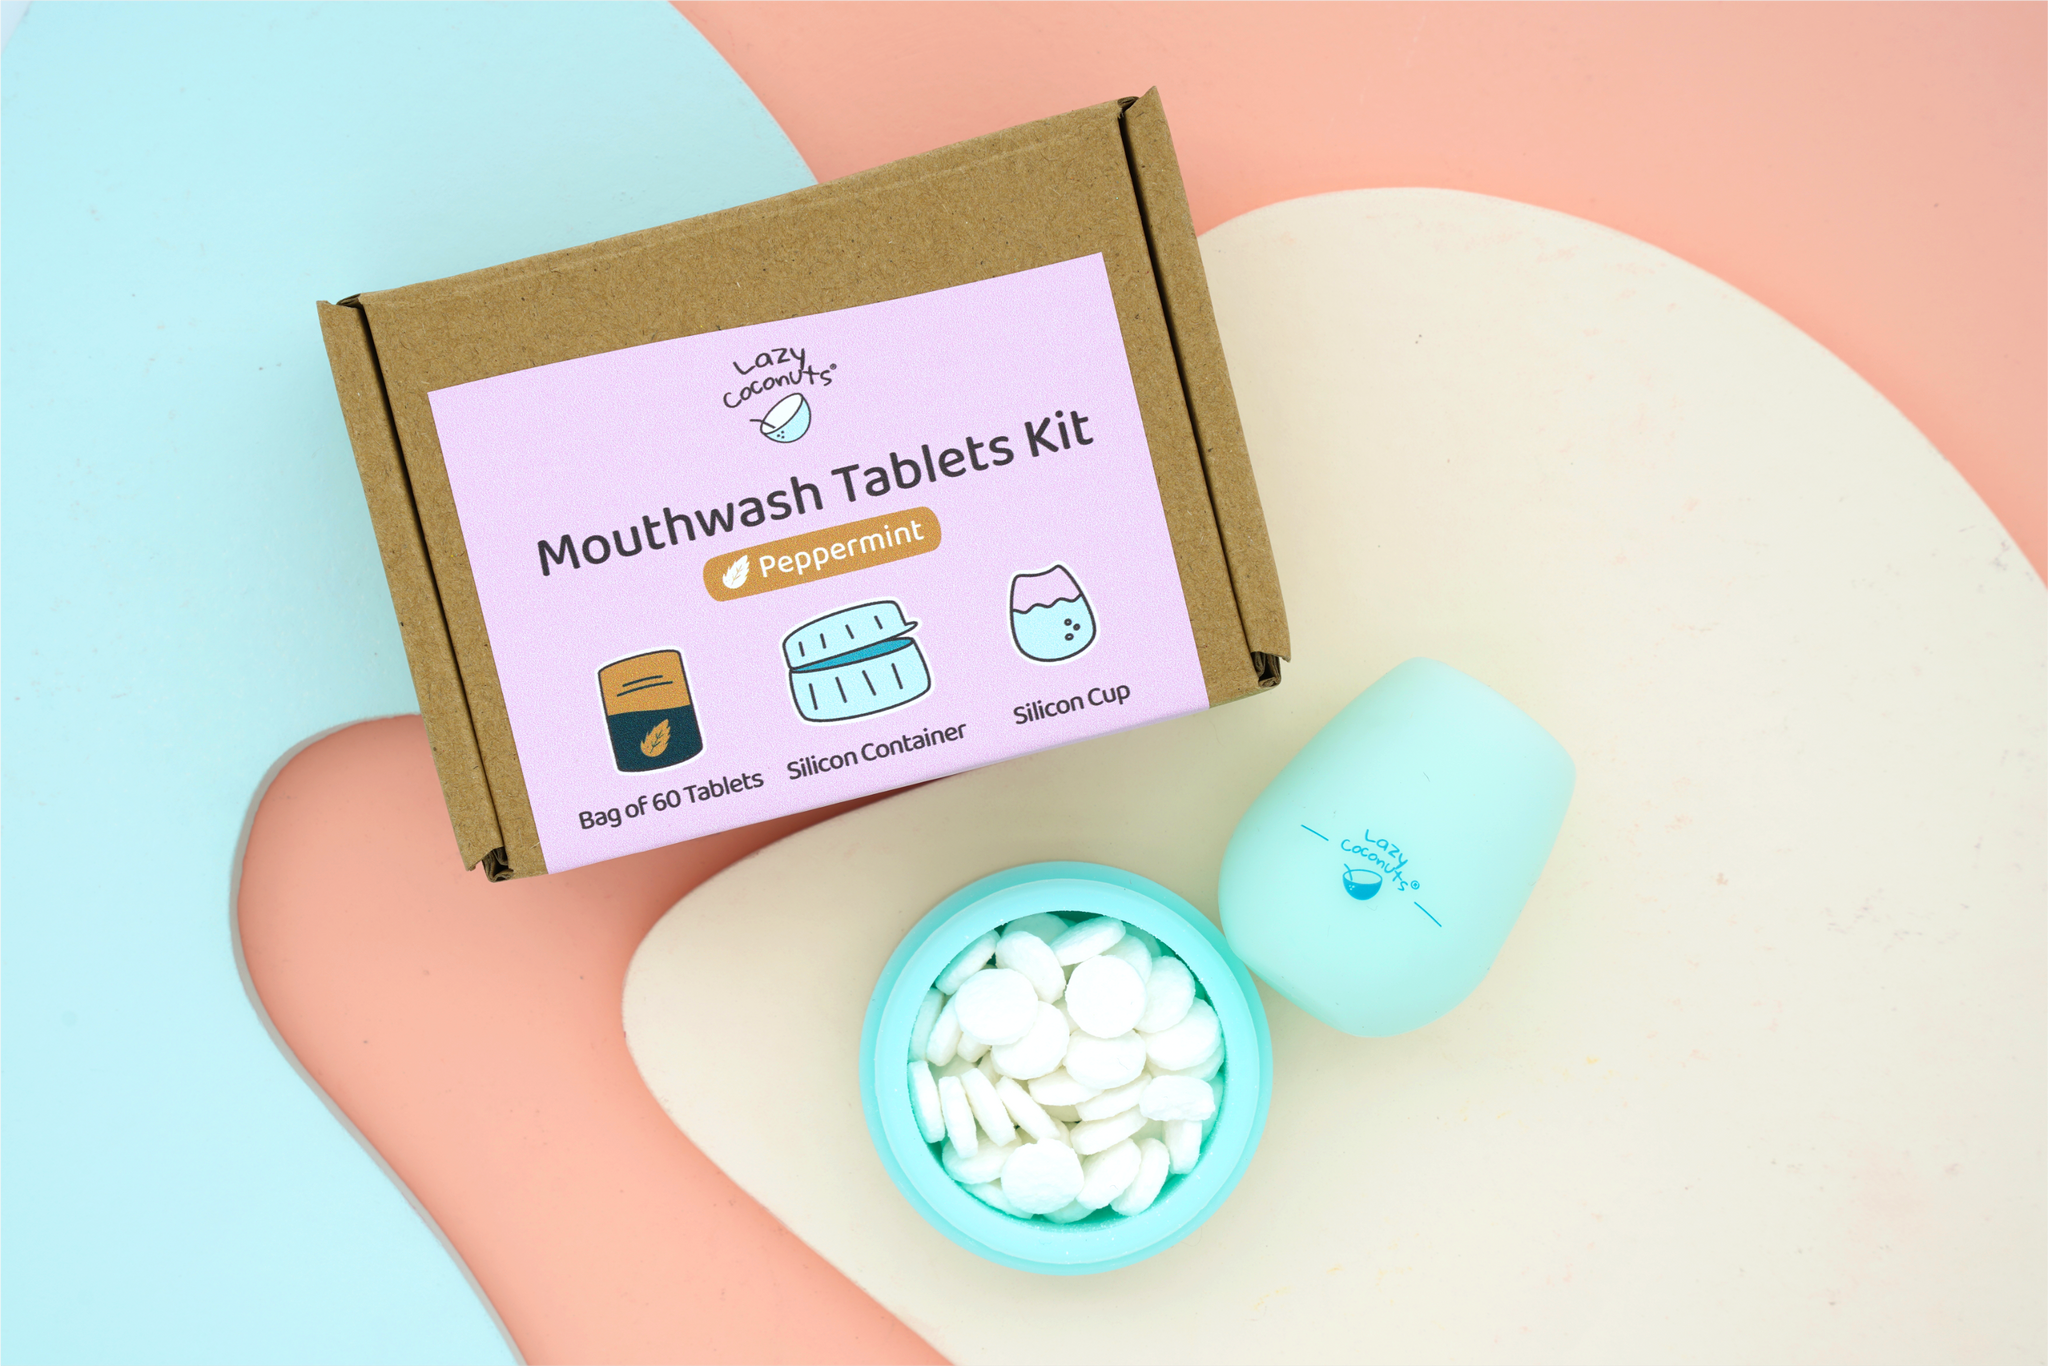 Lazy coconuts mouthwash tablet kit with silicon cup and container